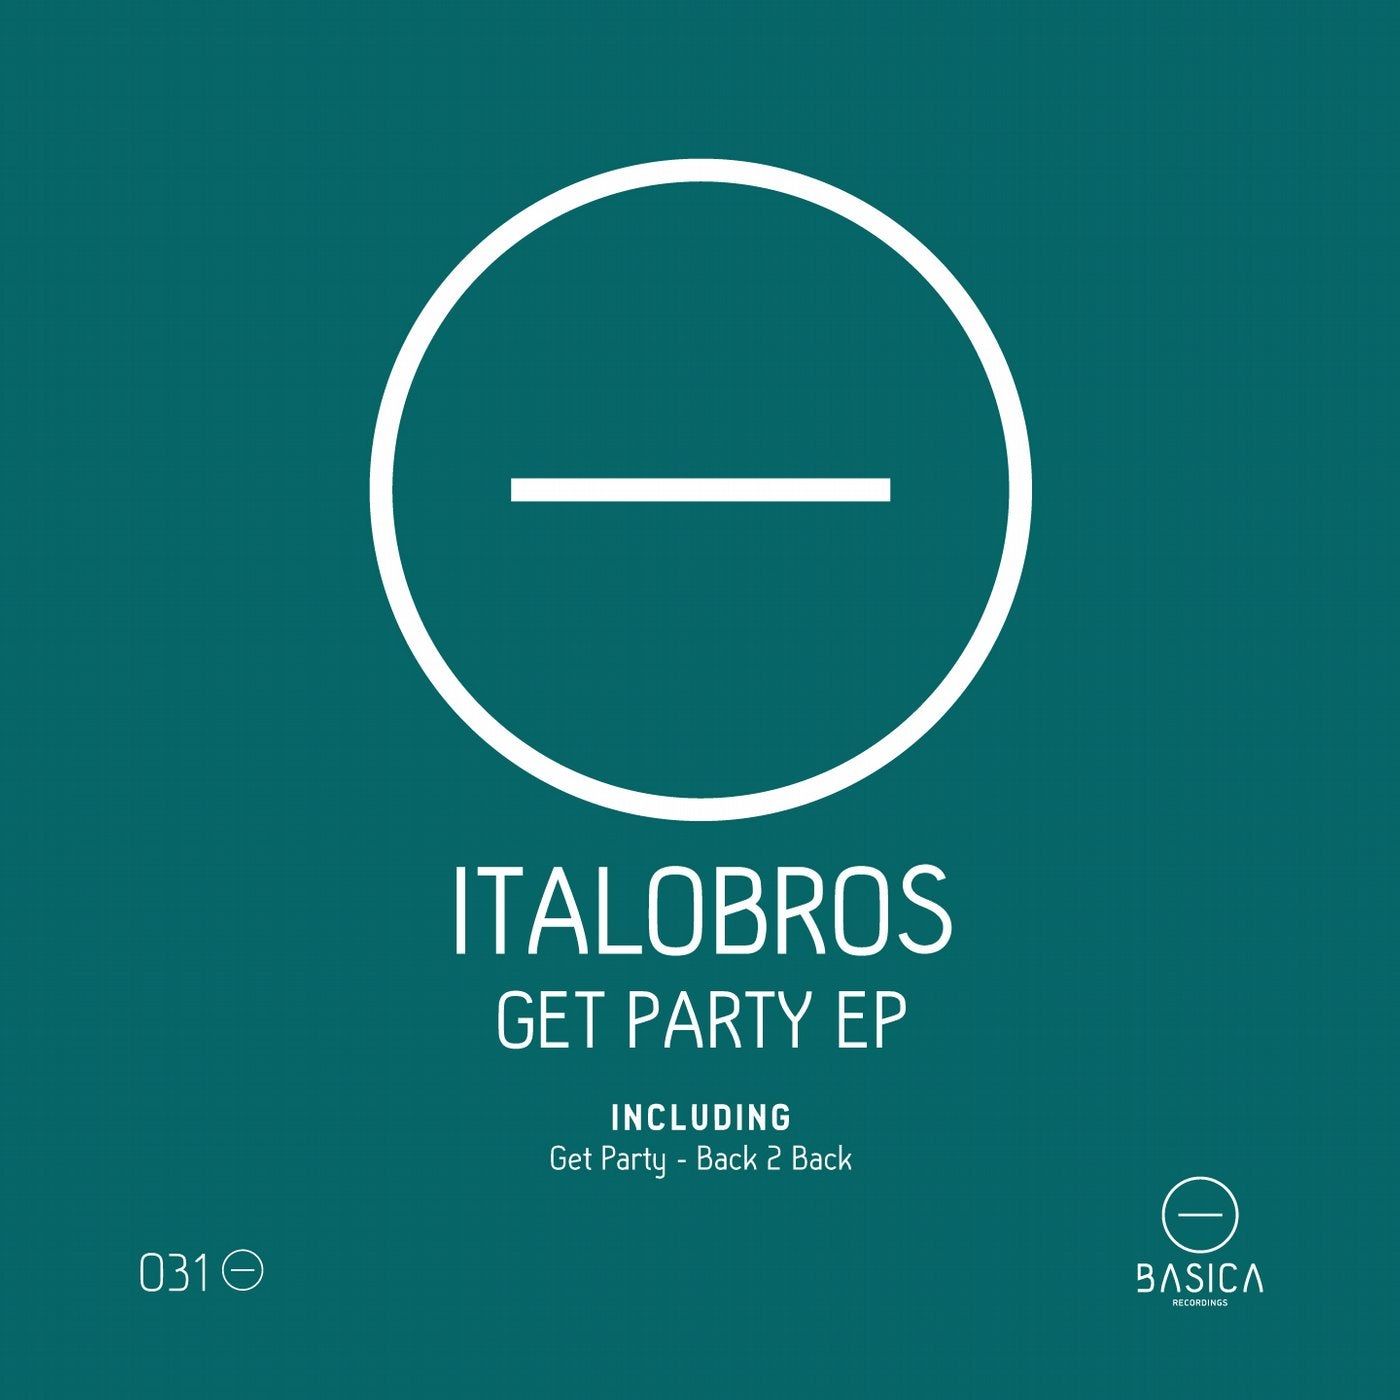 Get Party Ep